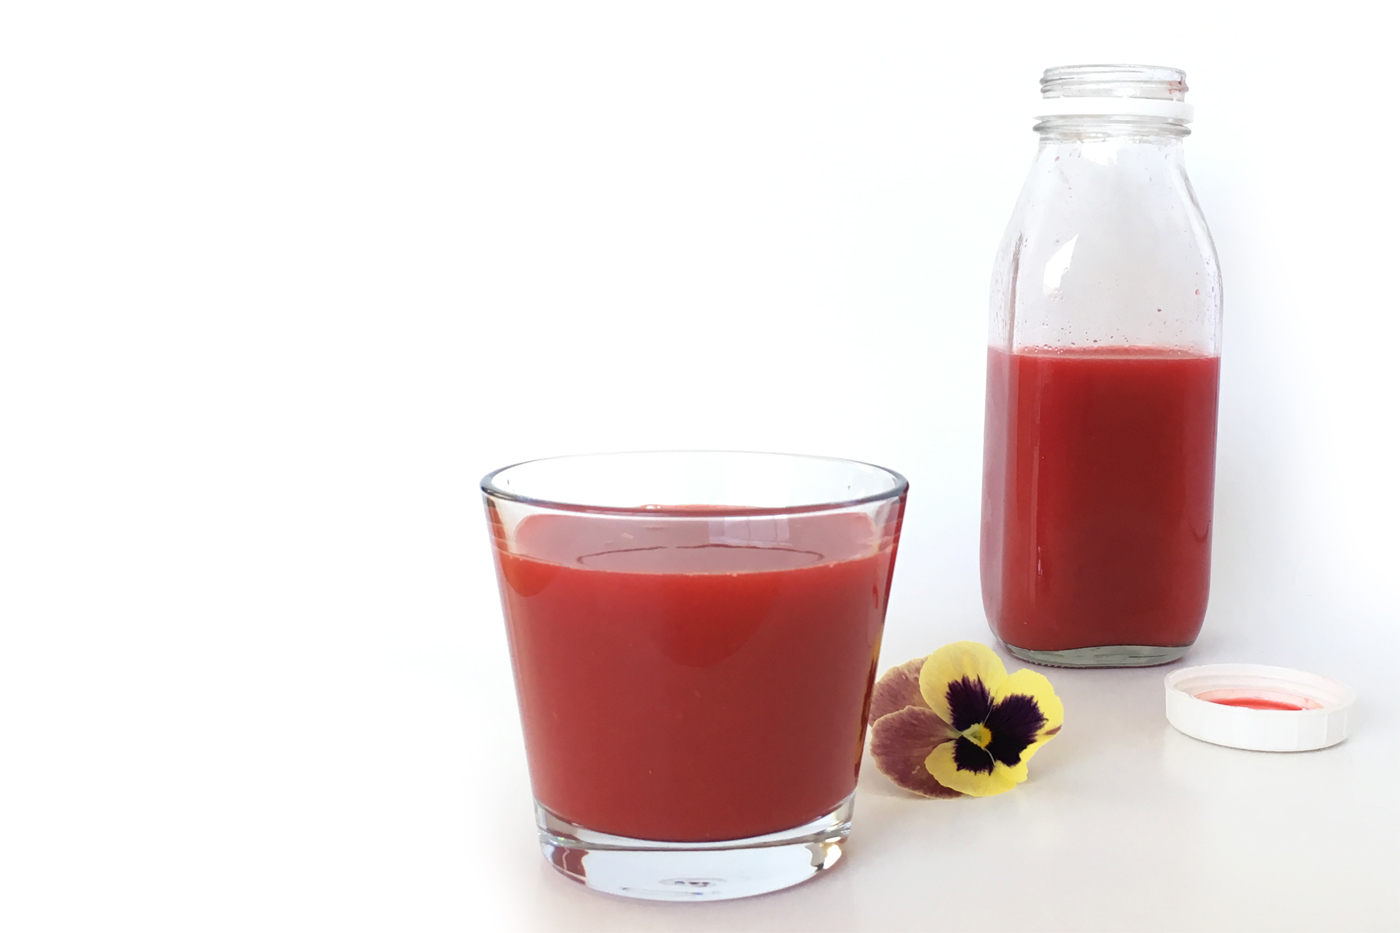 This juice recipe can help you with weightloss, energy, and detox.